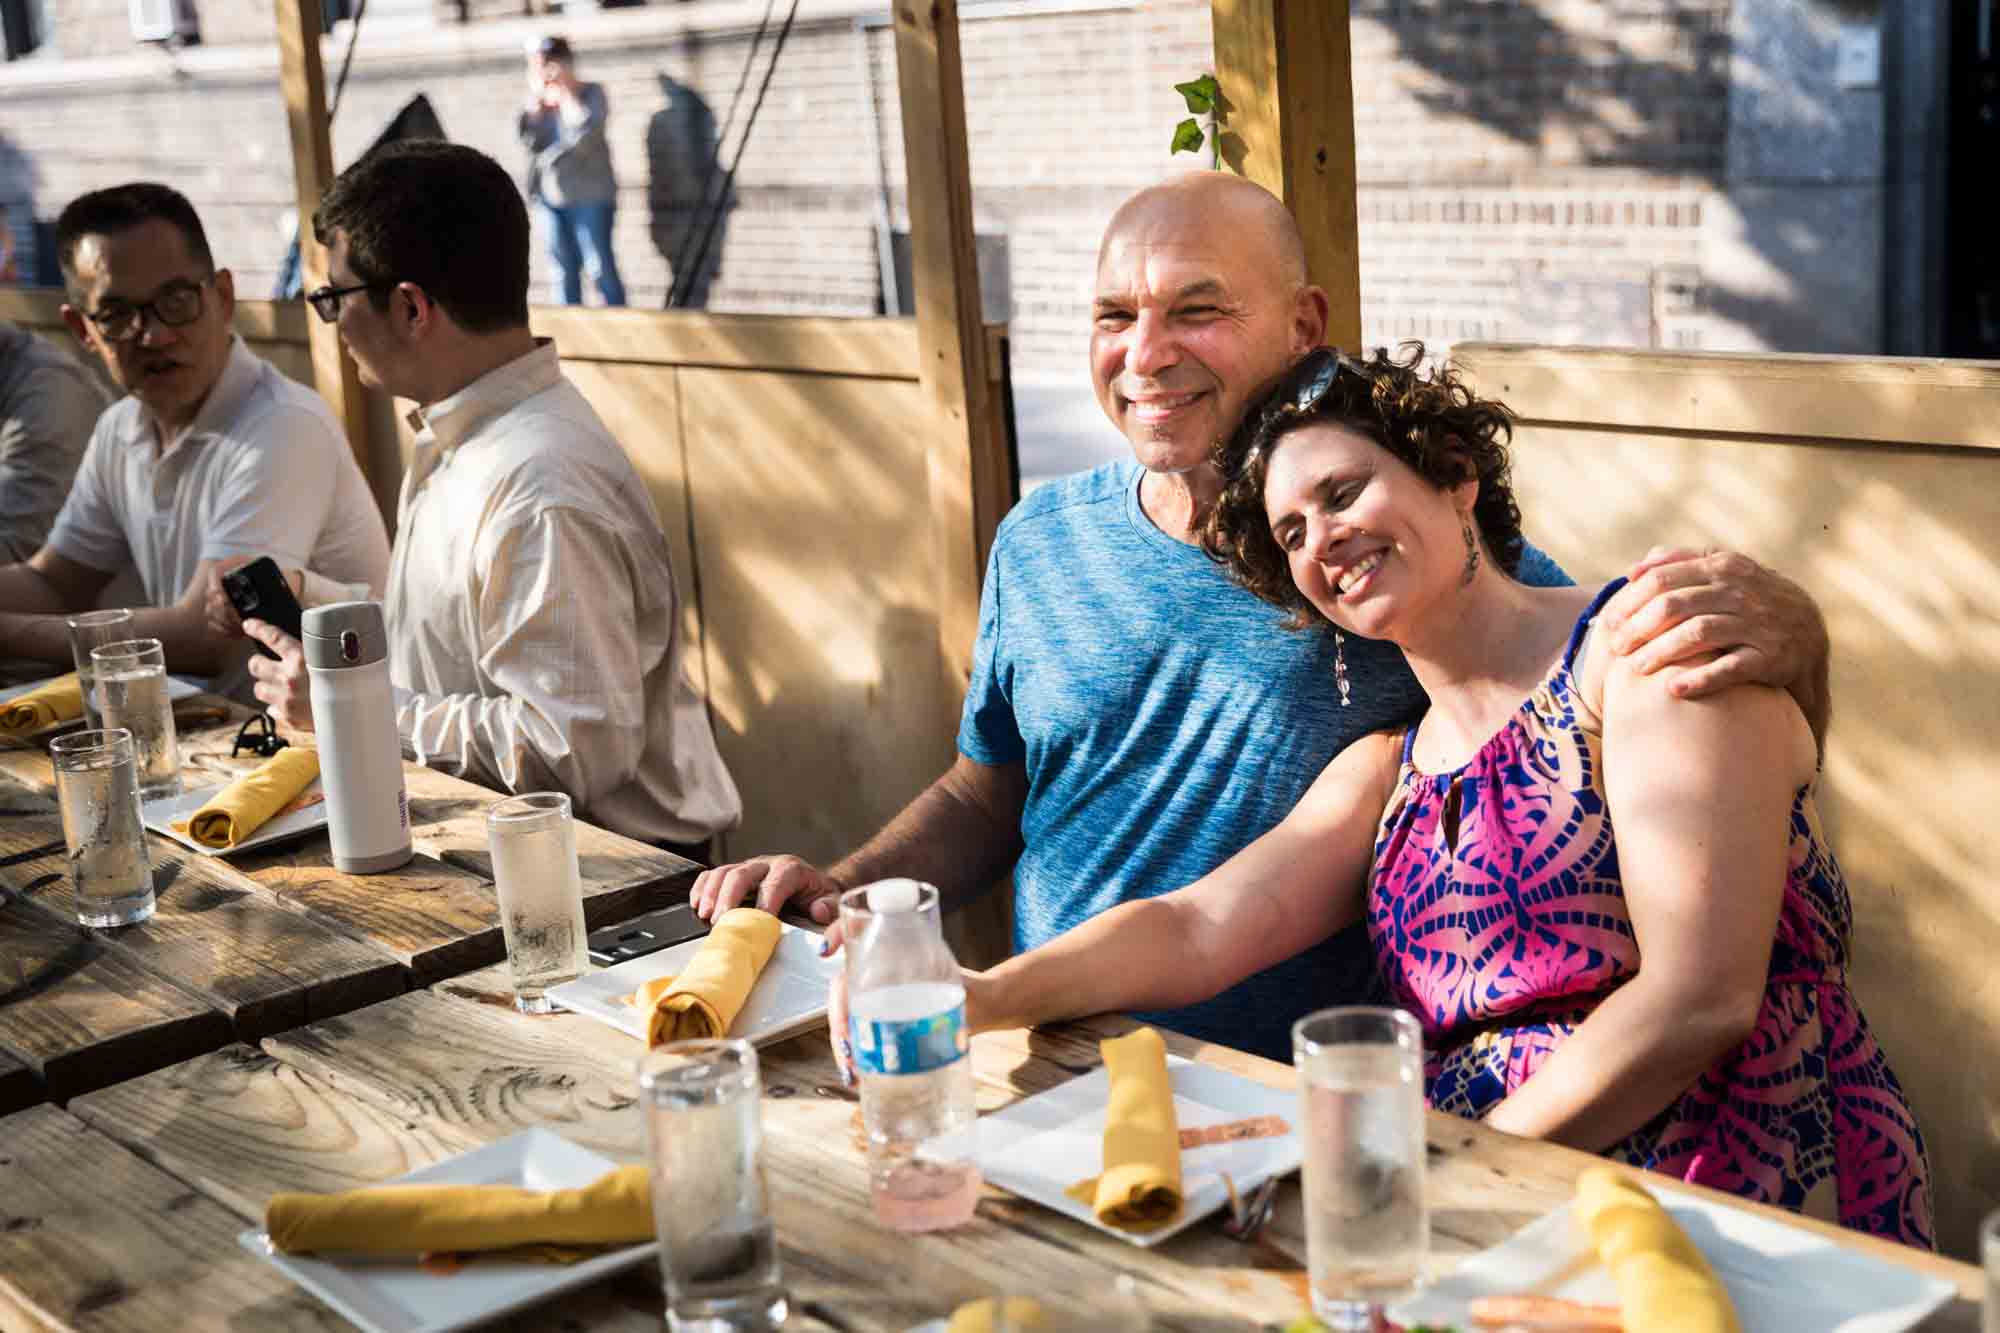 Woman leaning on man at dinner table during rehearsal dinner at an outdoor restaurant